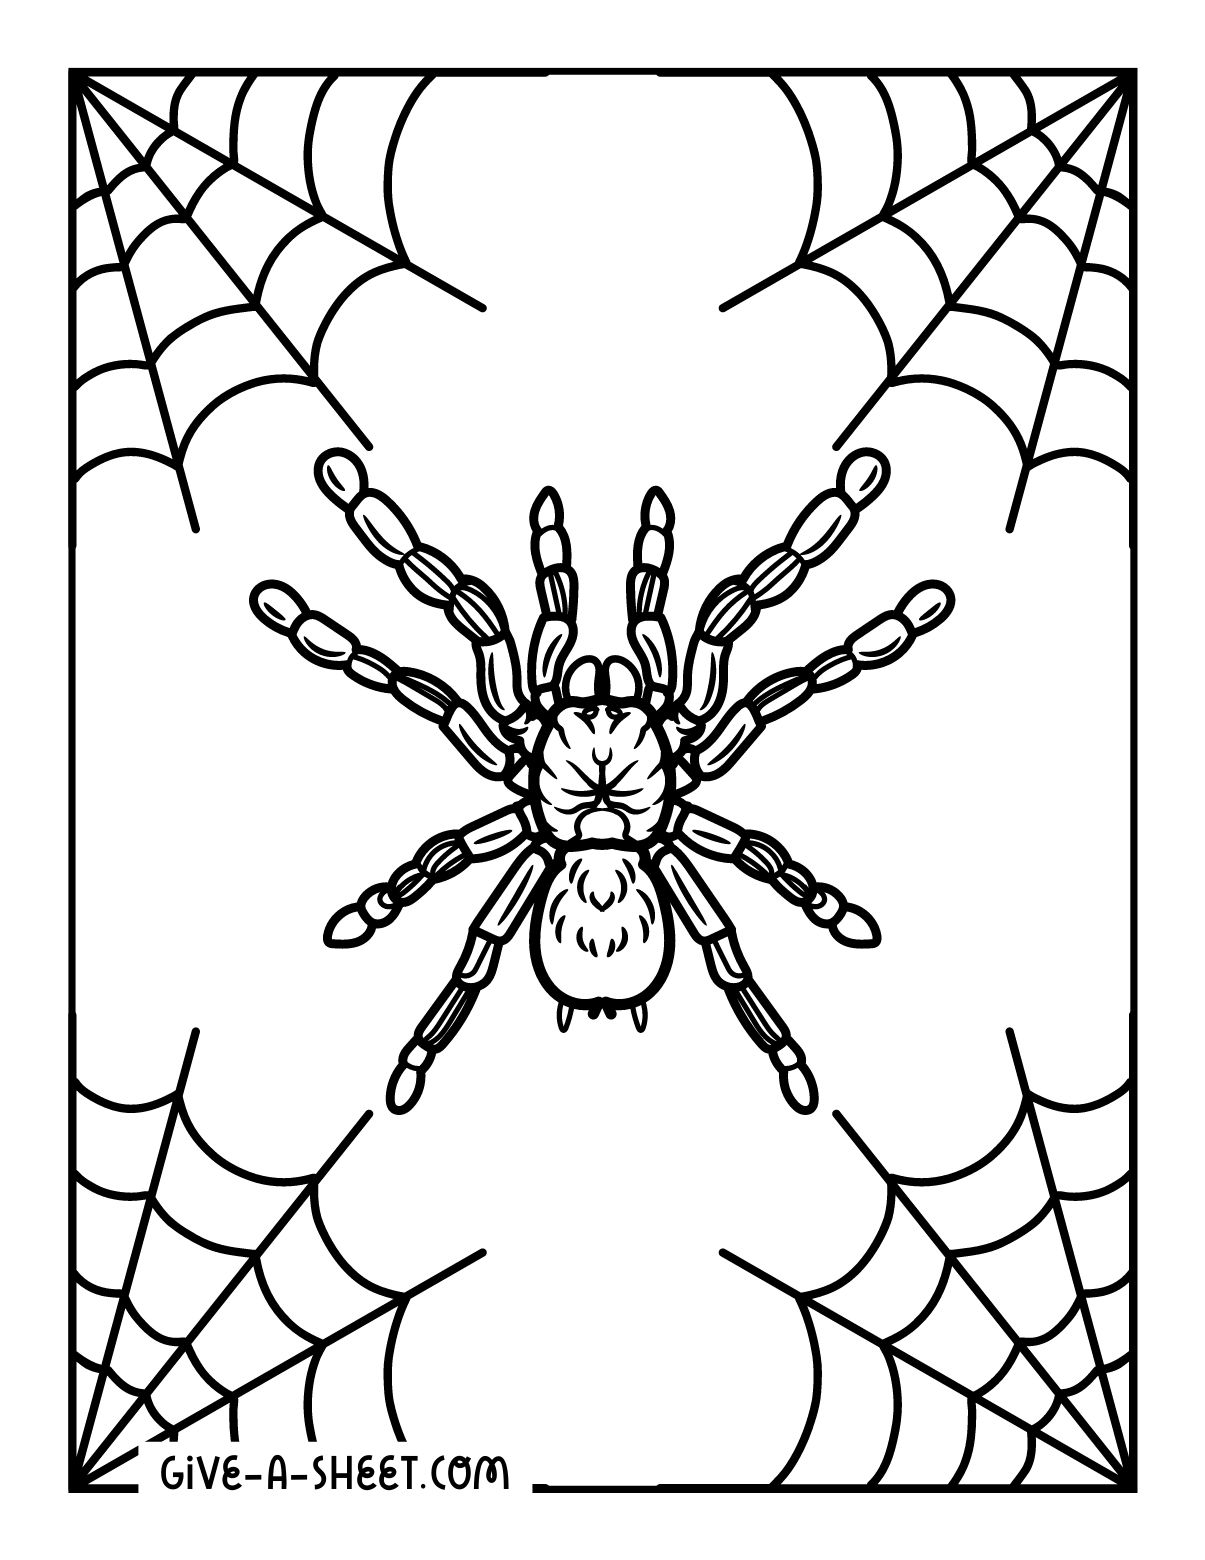 Halloween spider with realistic designs coloring page.